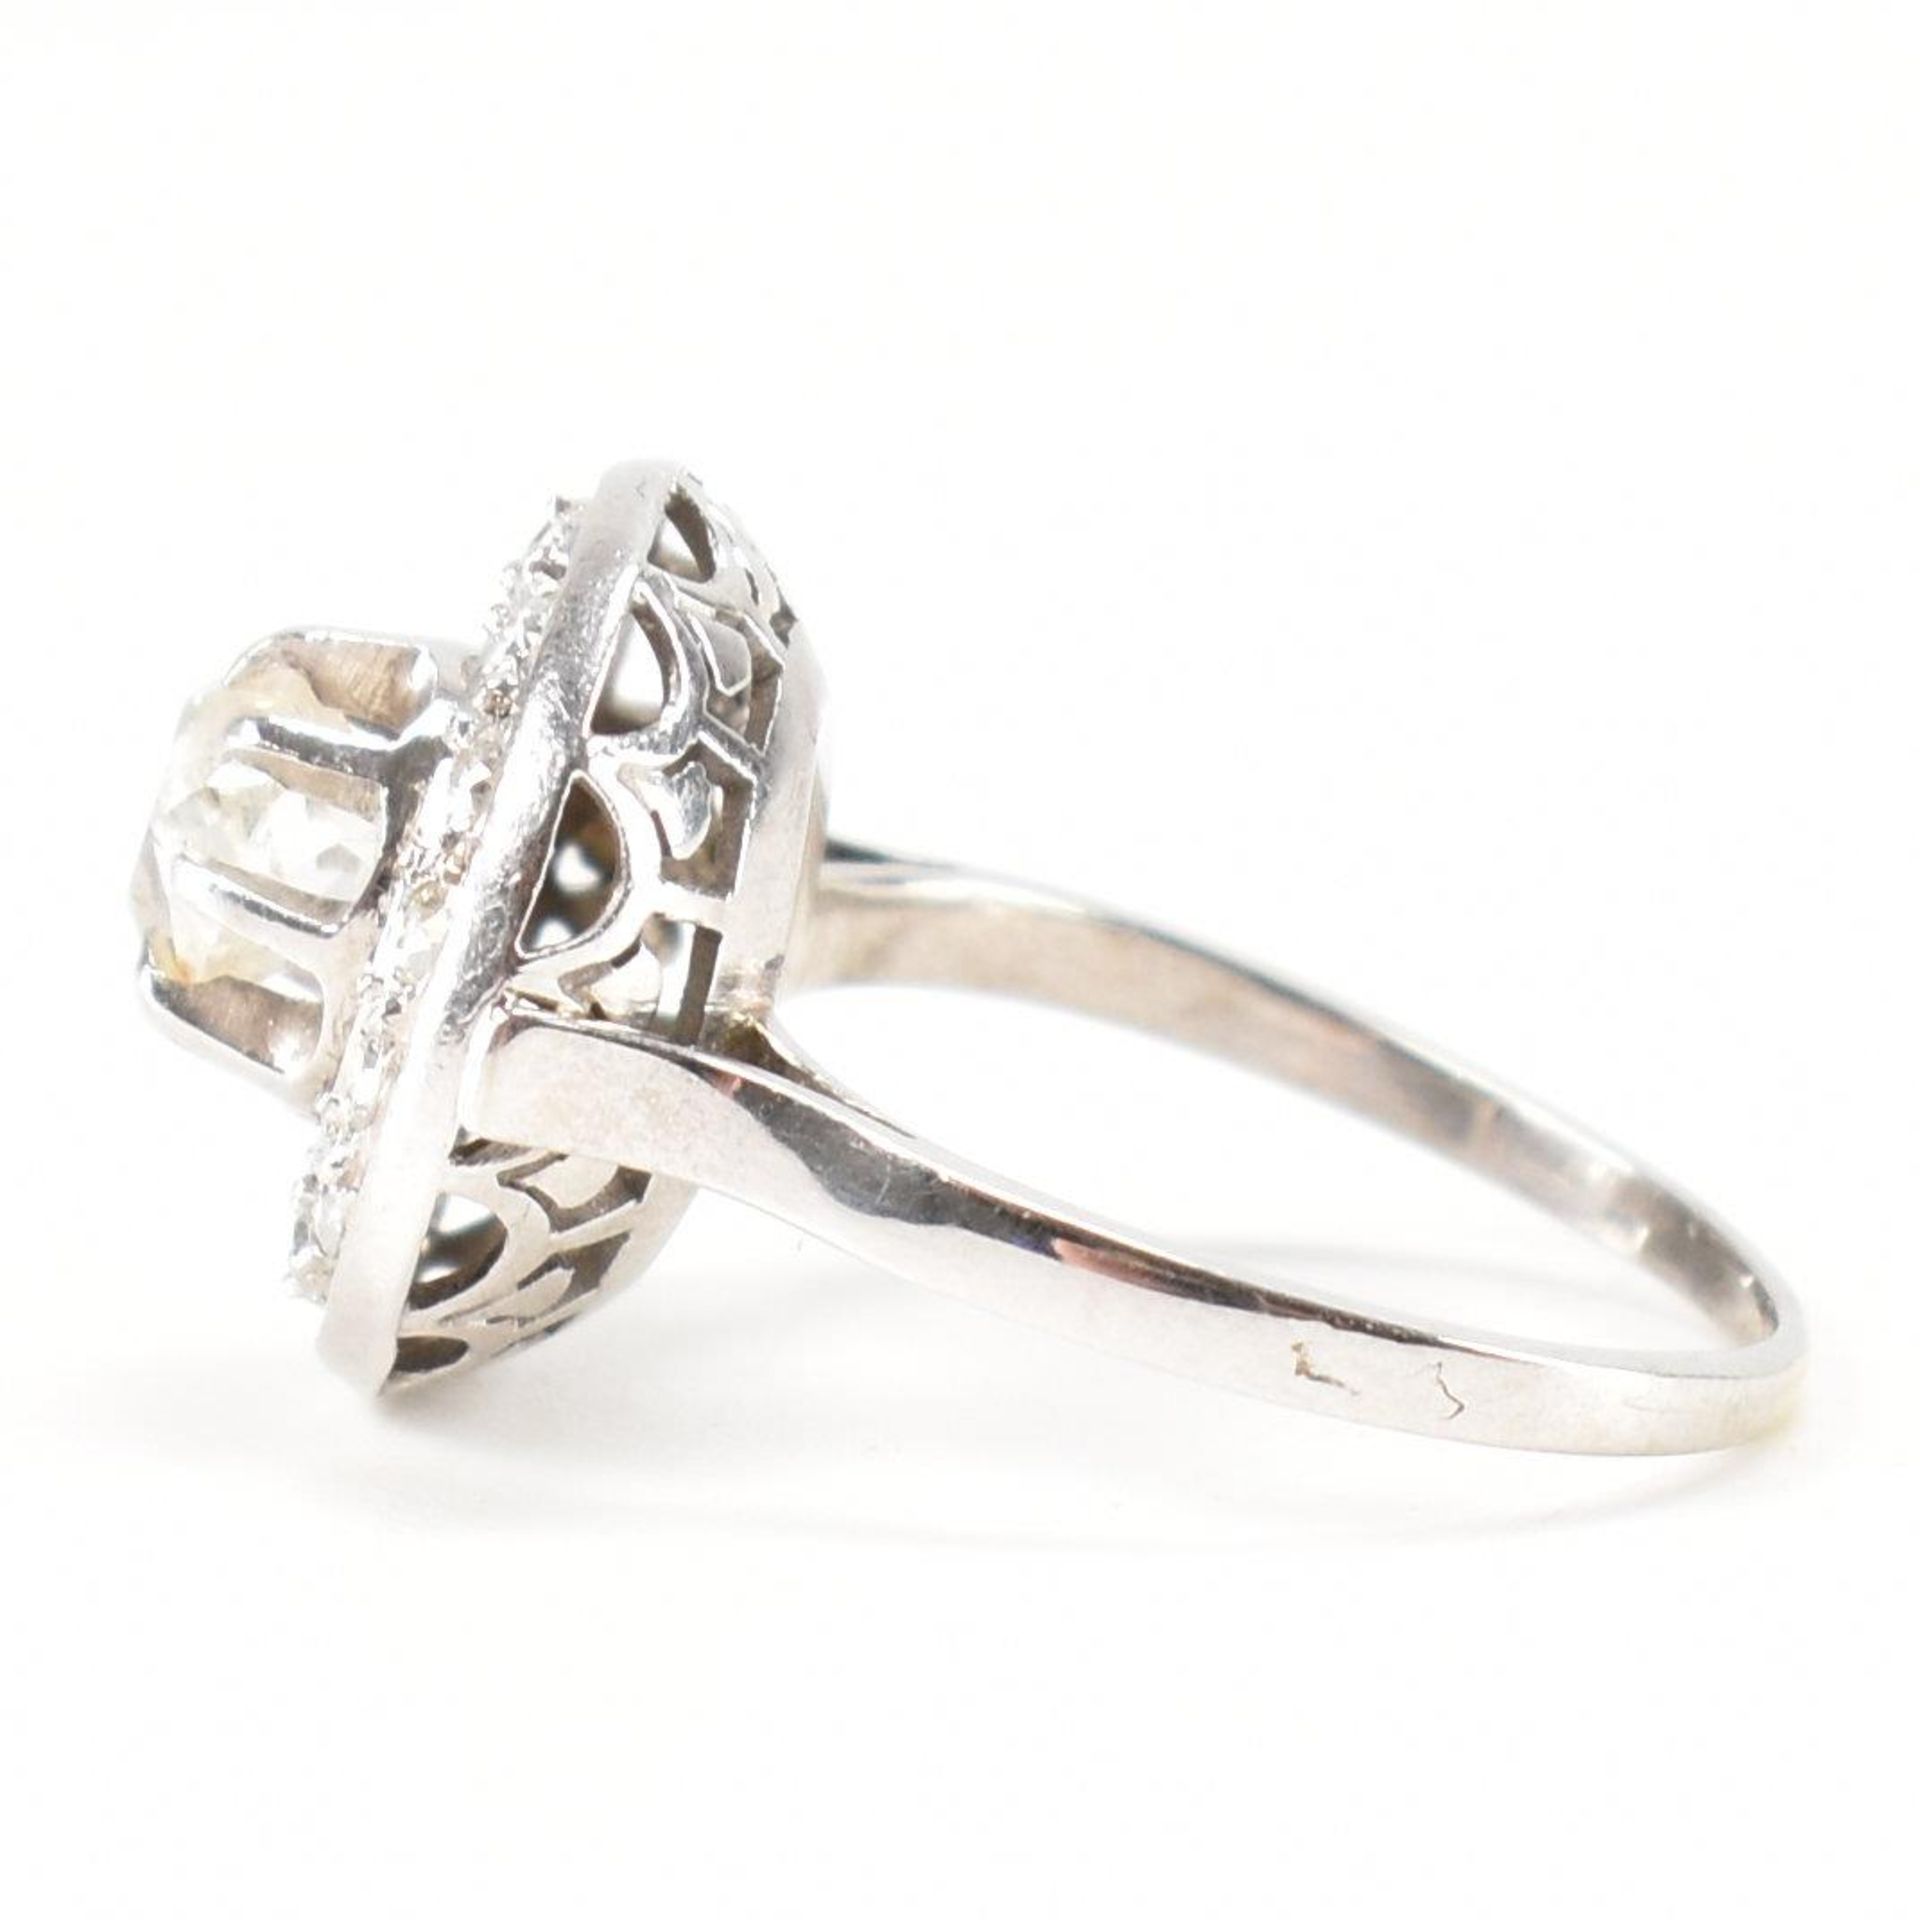 FRENCH ART DECO DIAMOND TARGET RING - Image 2 of 8